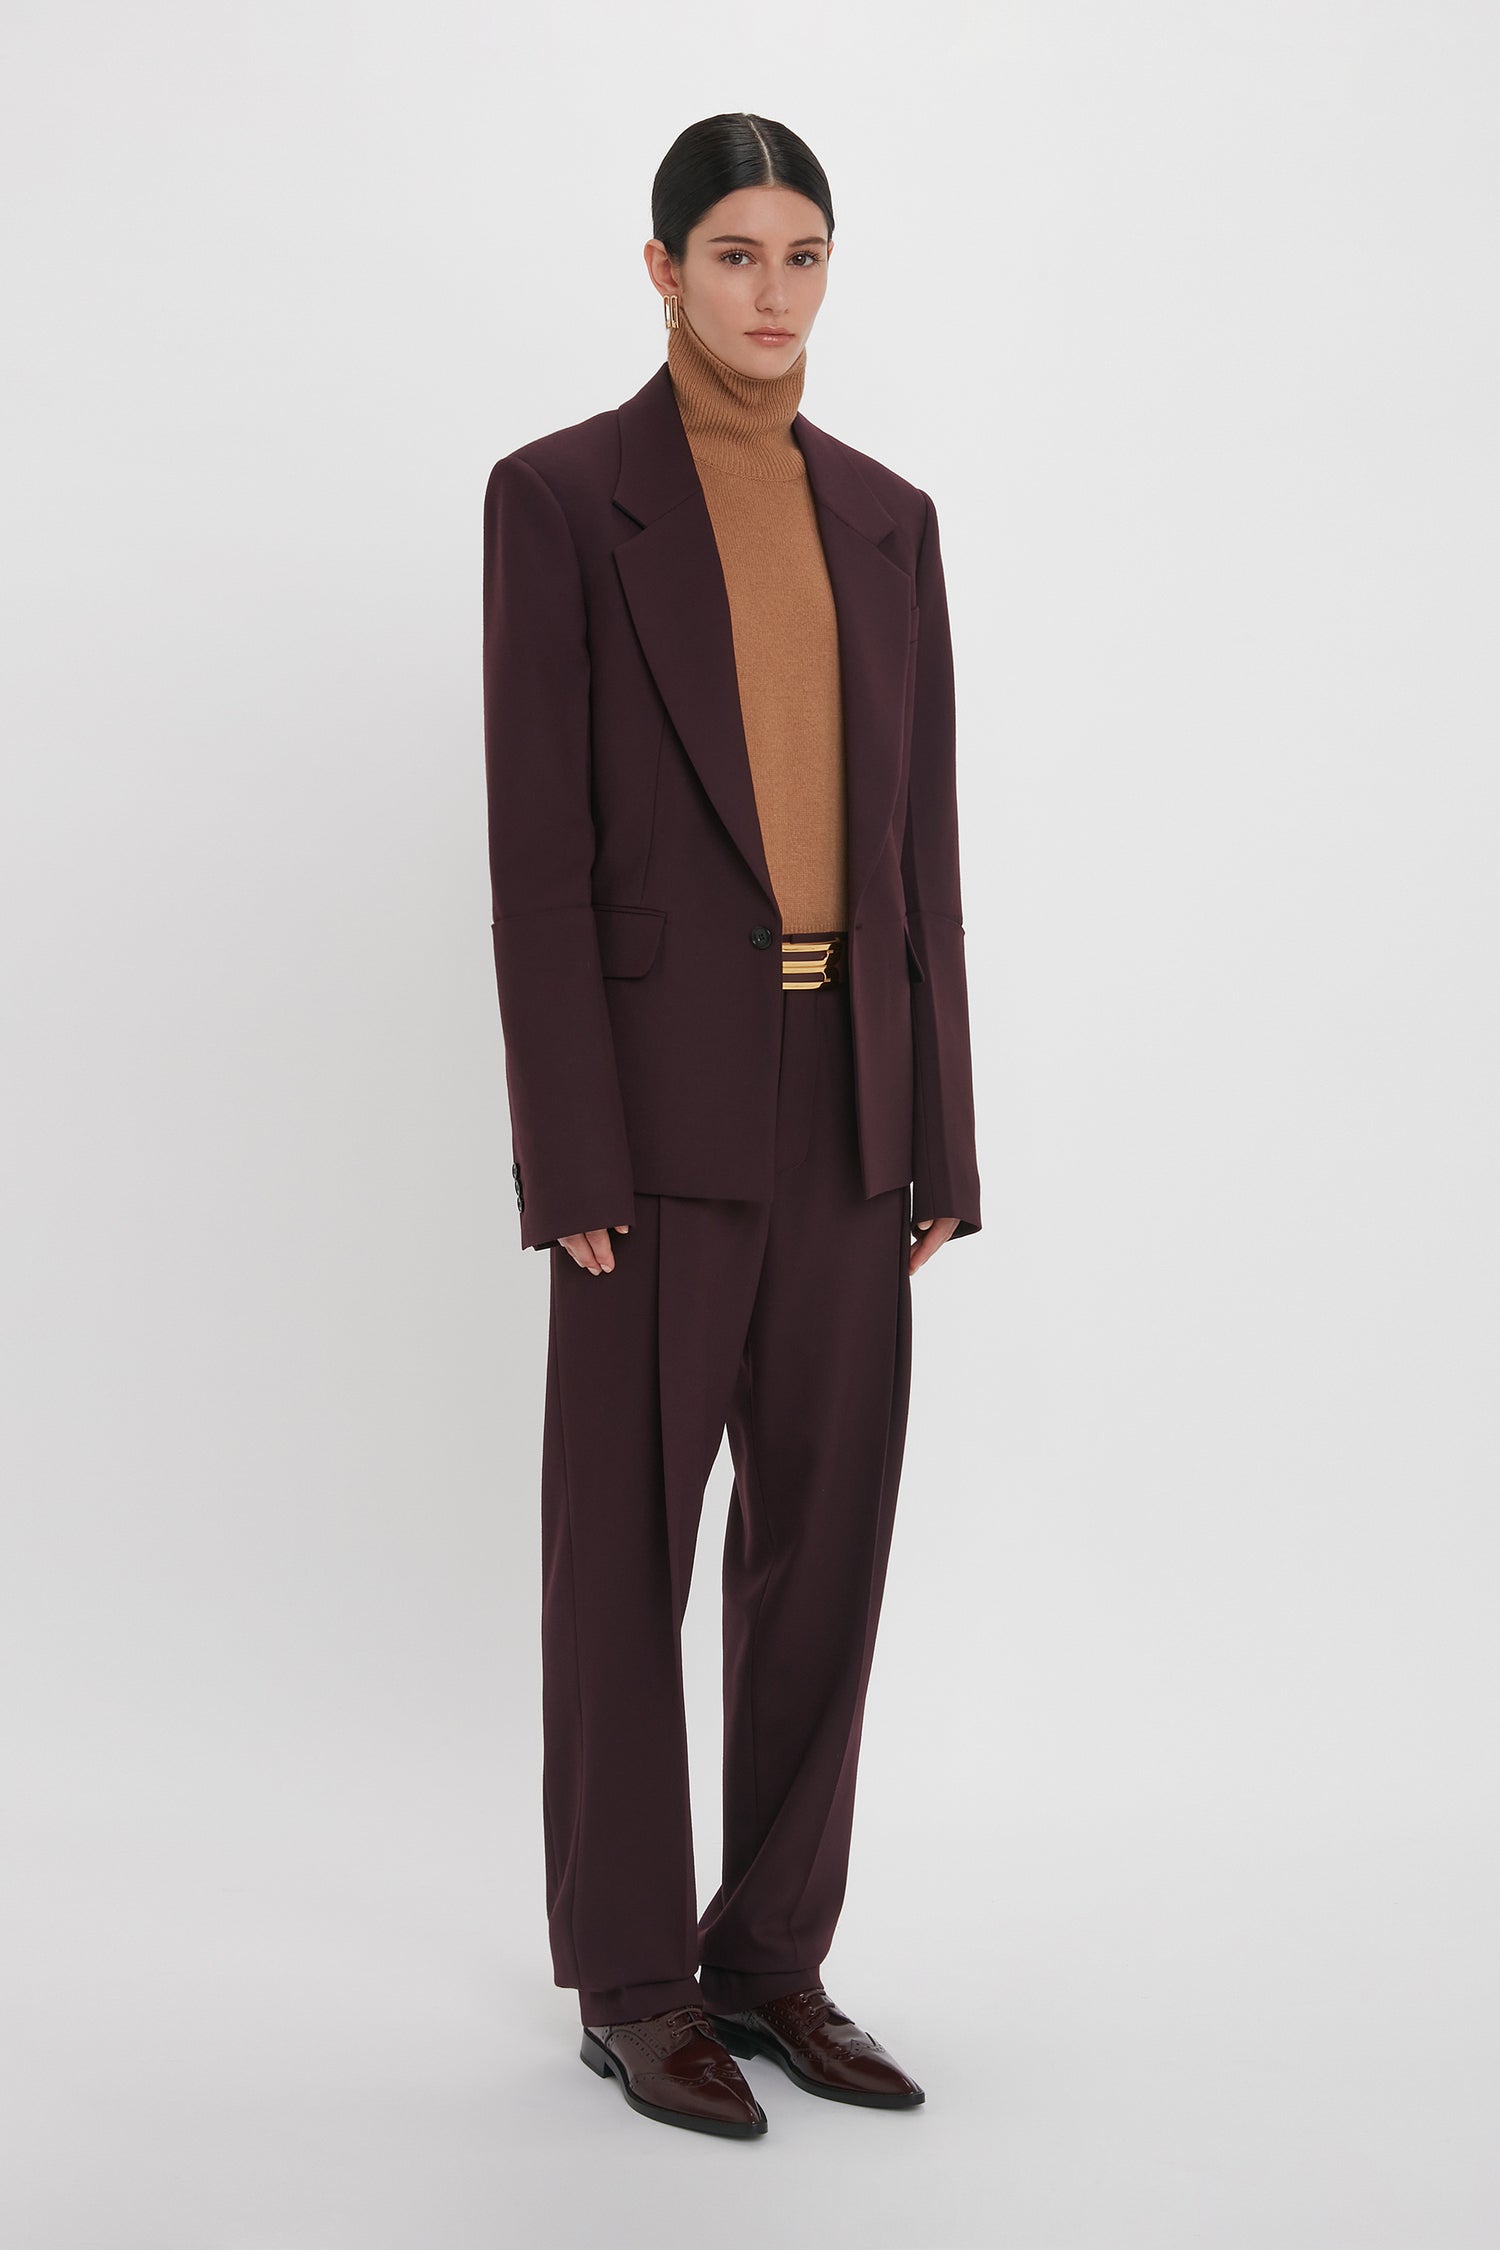 Person standing against a white background, wearing a dark burgundy Sleeve Detail Patch Pocket Jacket In Deep Mahogany by Victoria Beckham featuring a single-breasted blazer with a brown turtleneck sweater underneath and dark brown shoes.